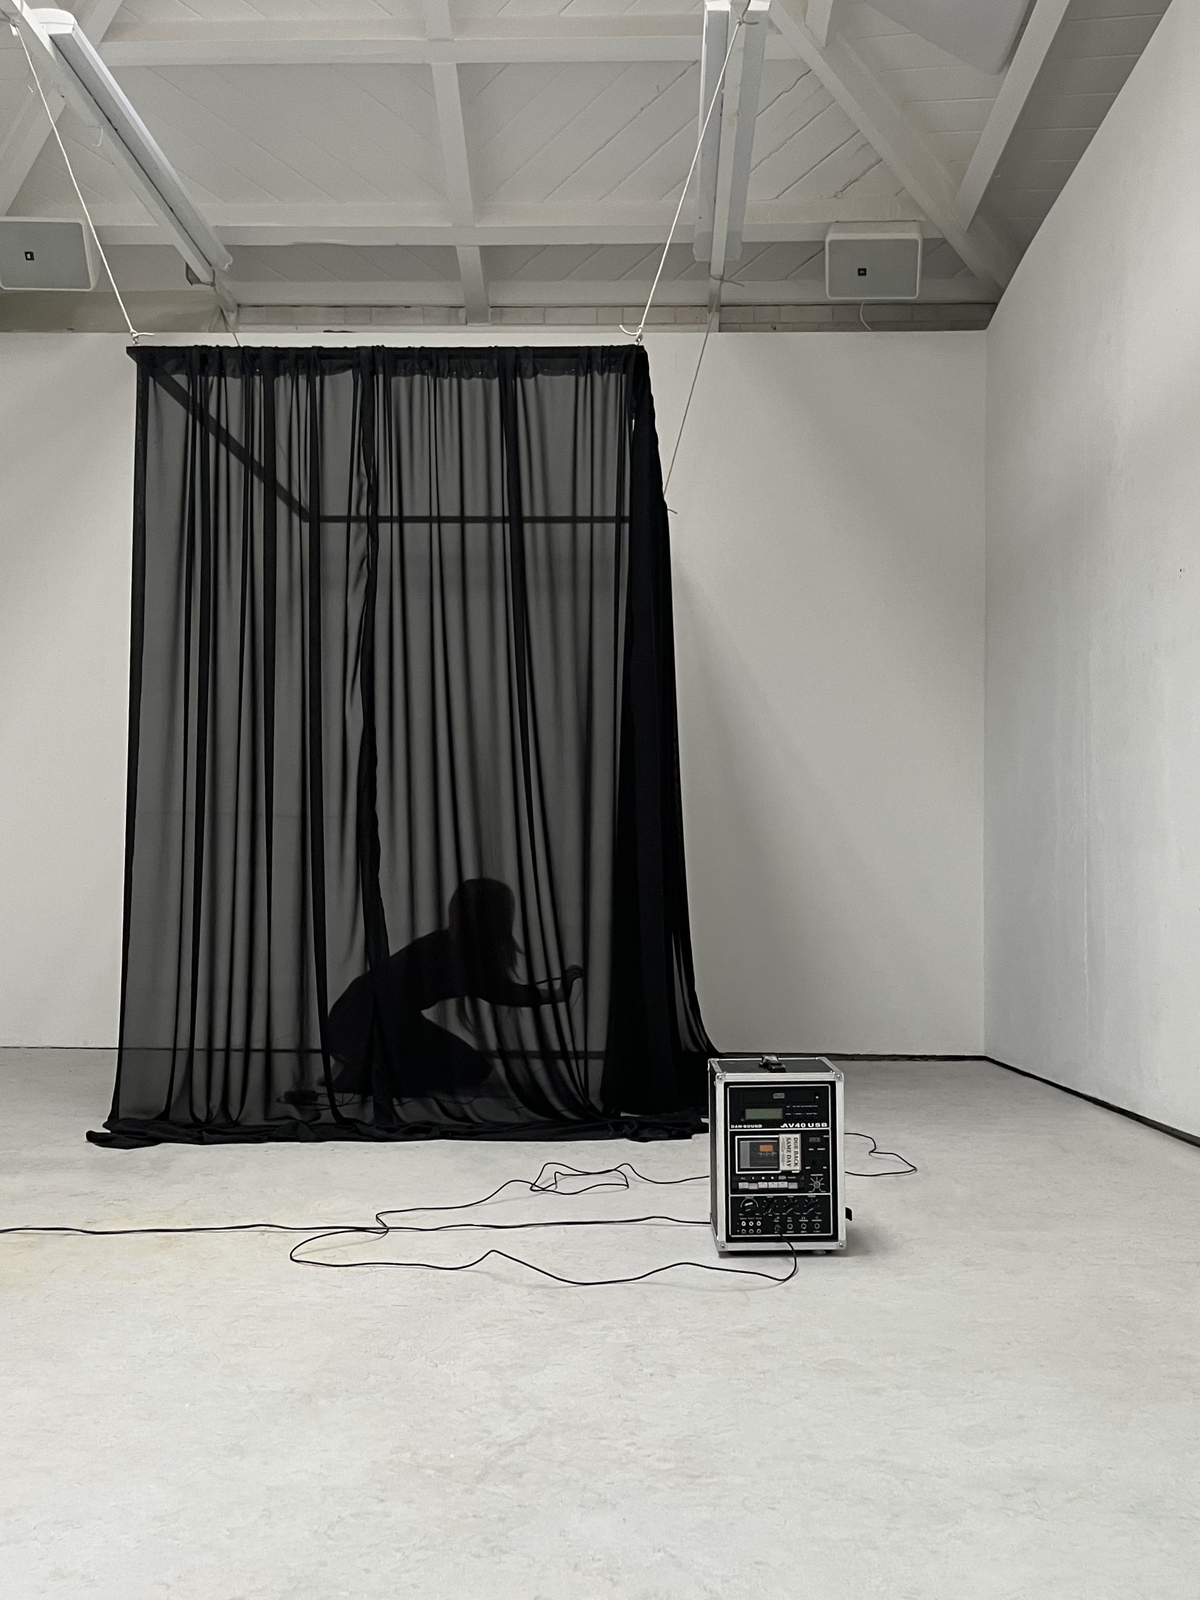 an image of a silhouette of a person crouching inside a black, curtained space, behind an amp.